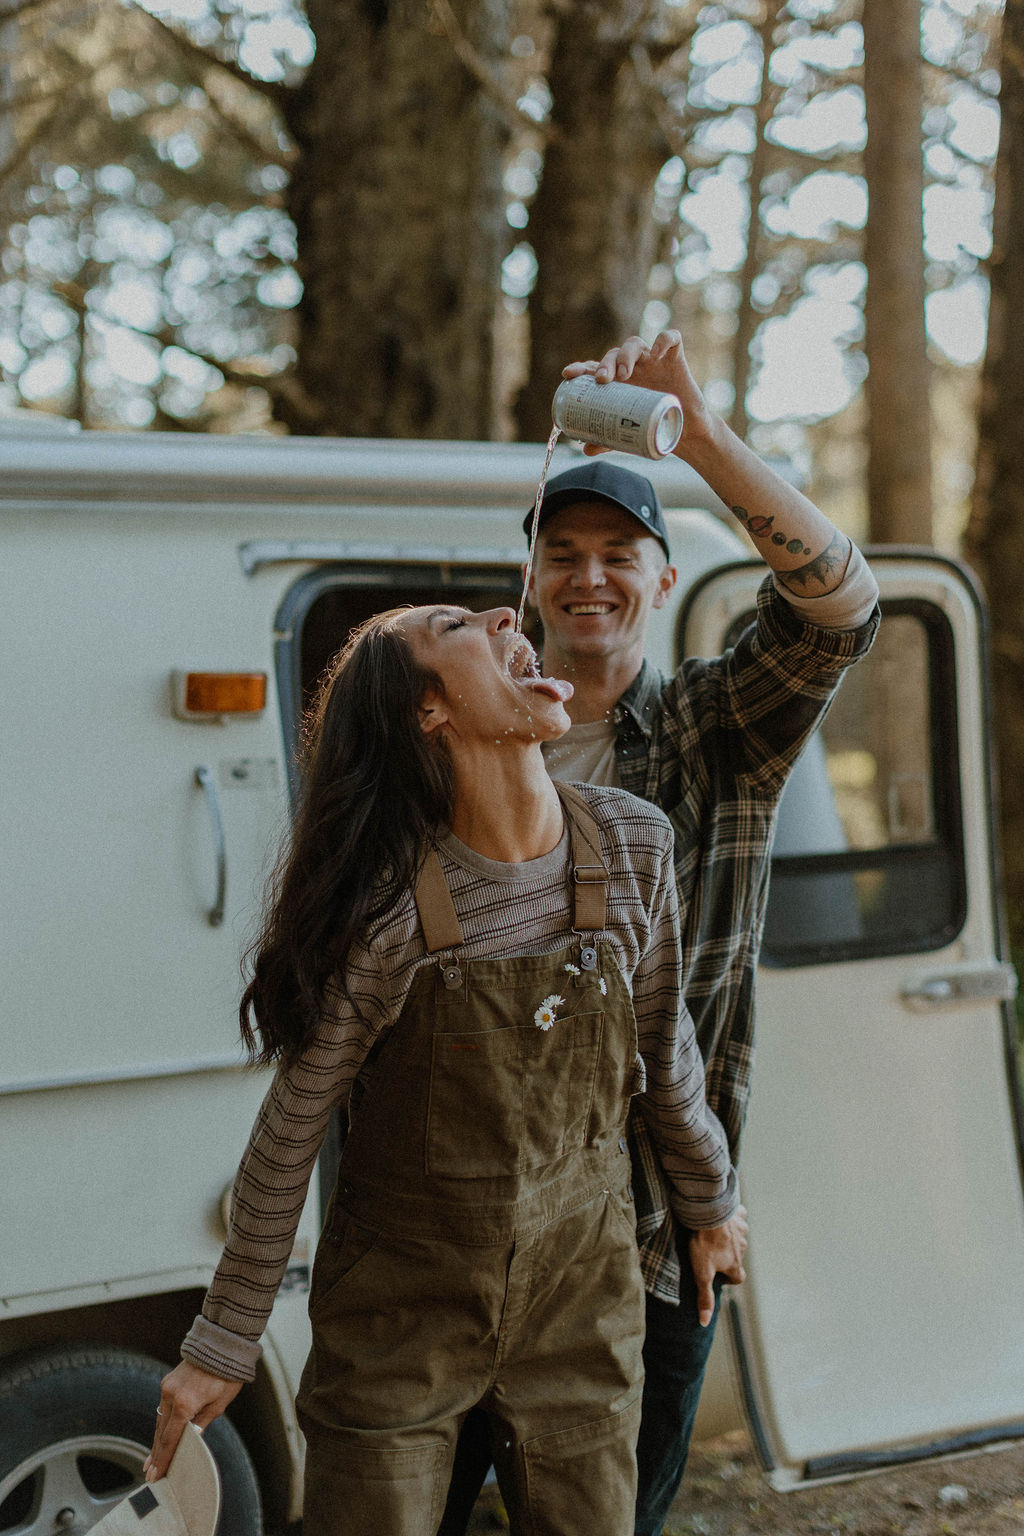 the couple having fun and drinking at their camp photoshoot